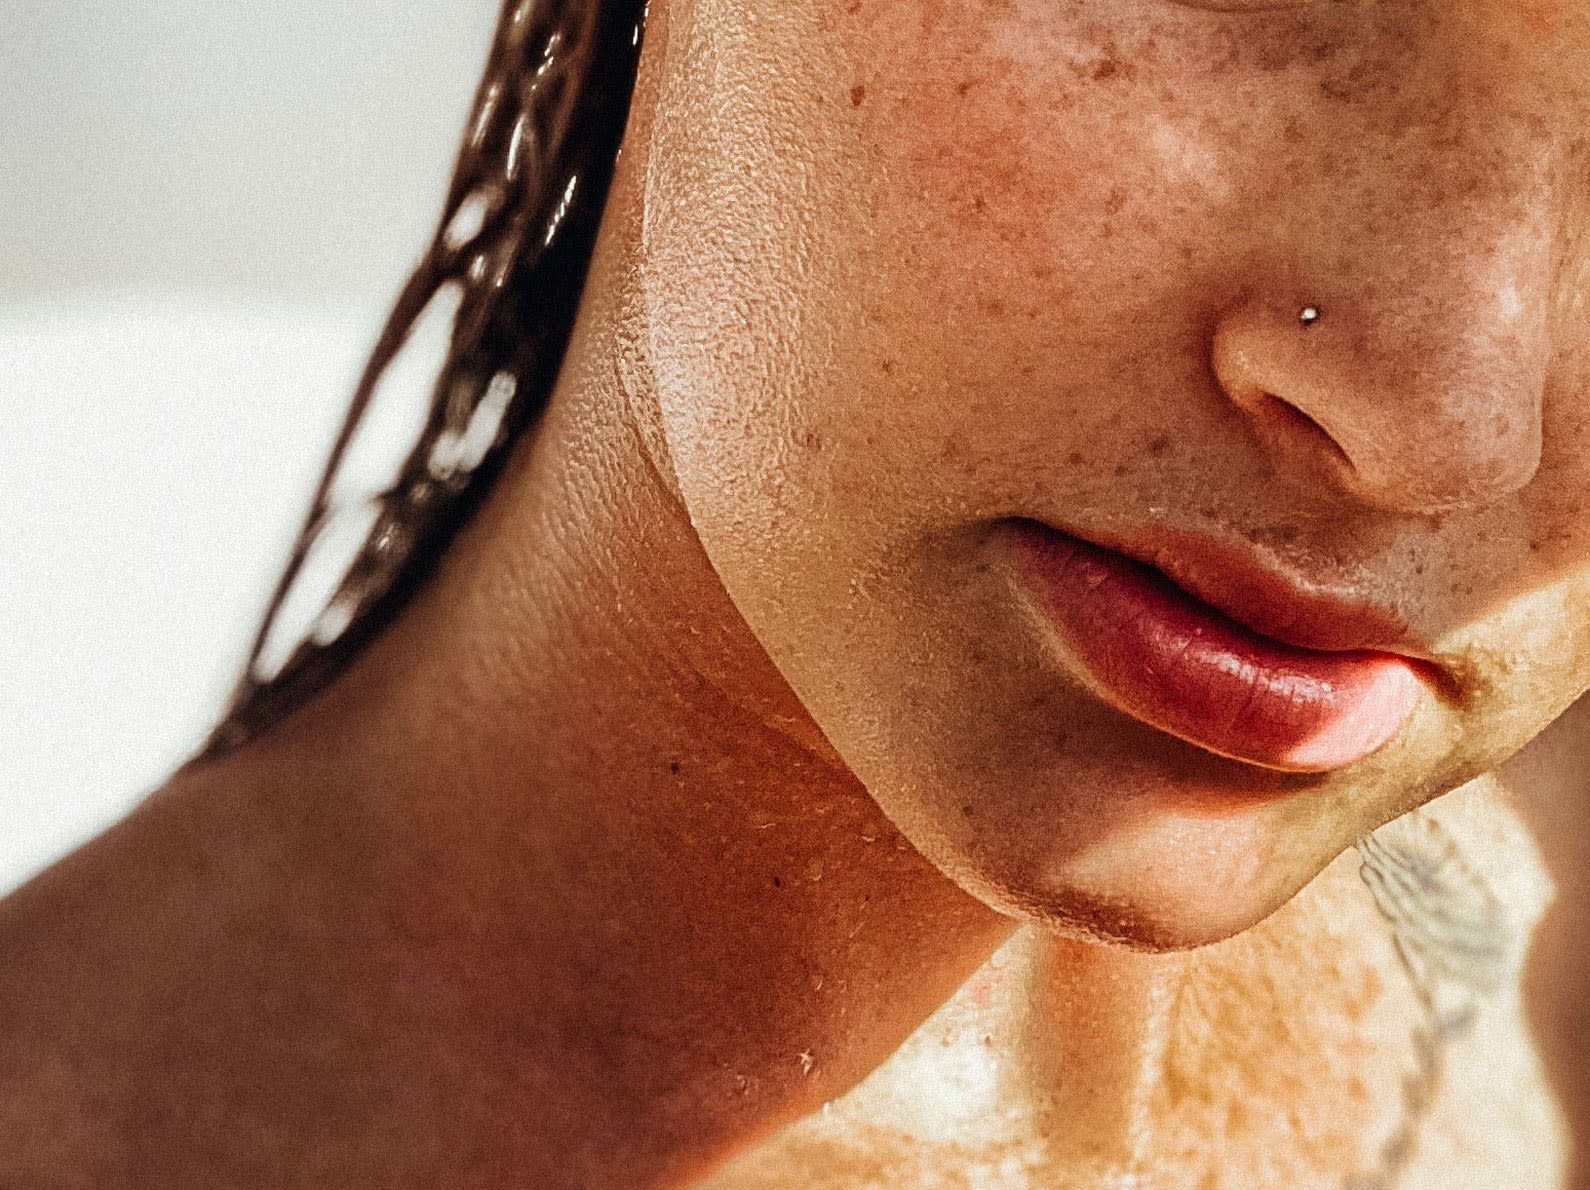 Woman's face with freckles and dark spots